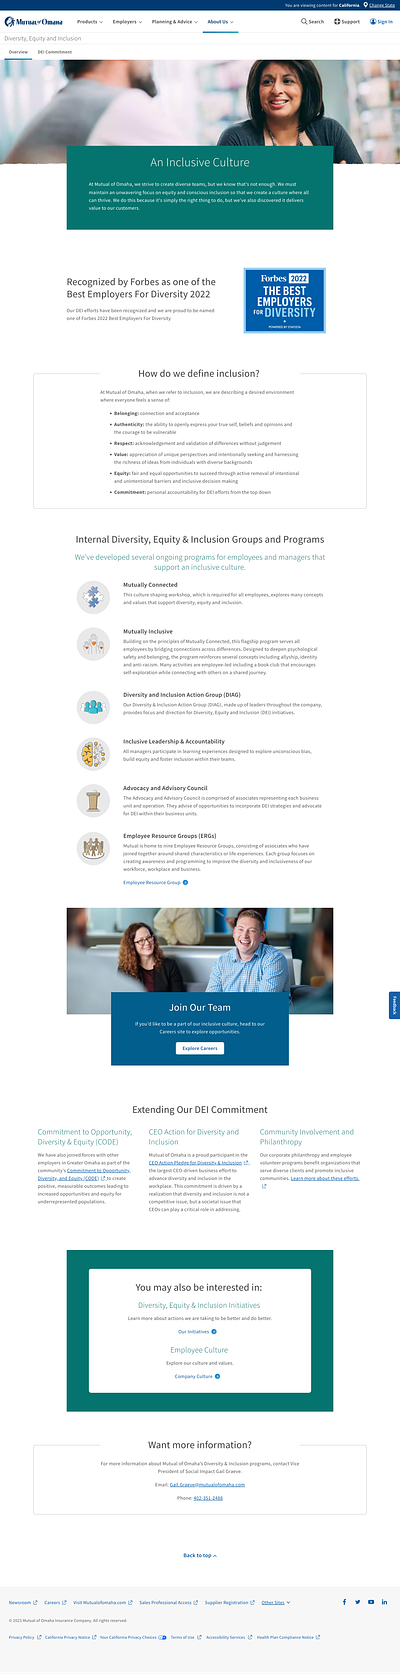 Diversity, Equity & Inclusion Pages design ui user experience user interface ux